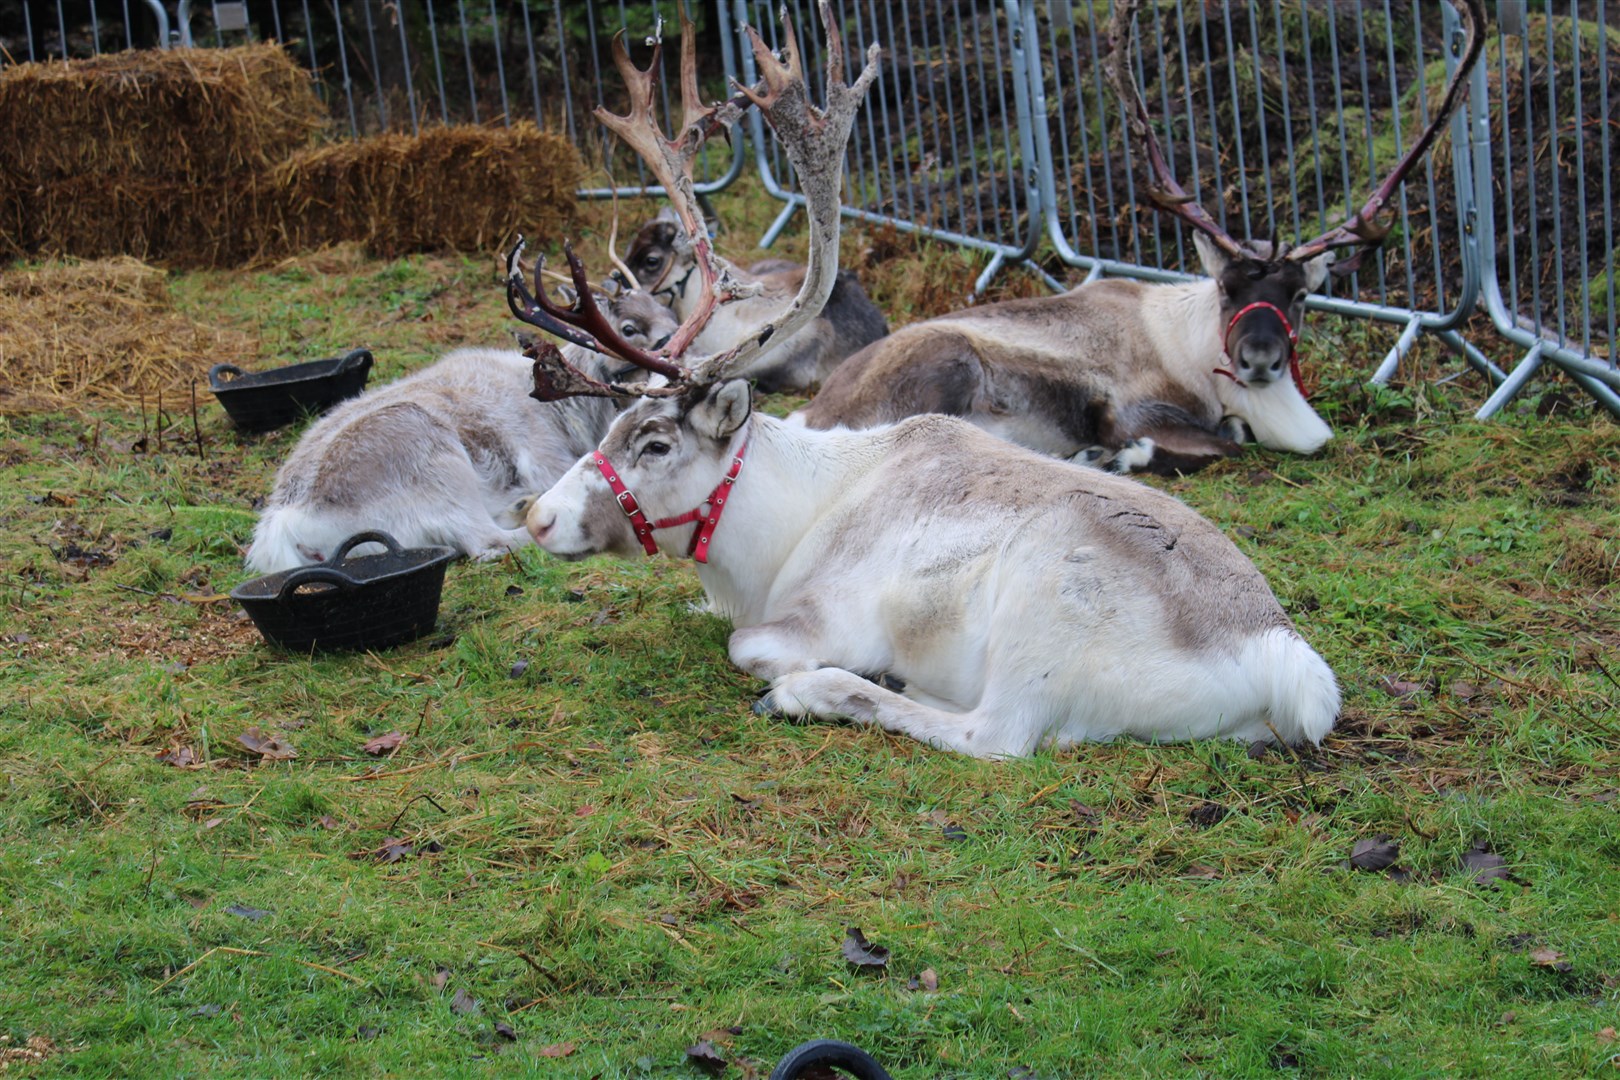 The reindeer are always a great attraction.